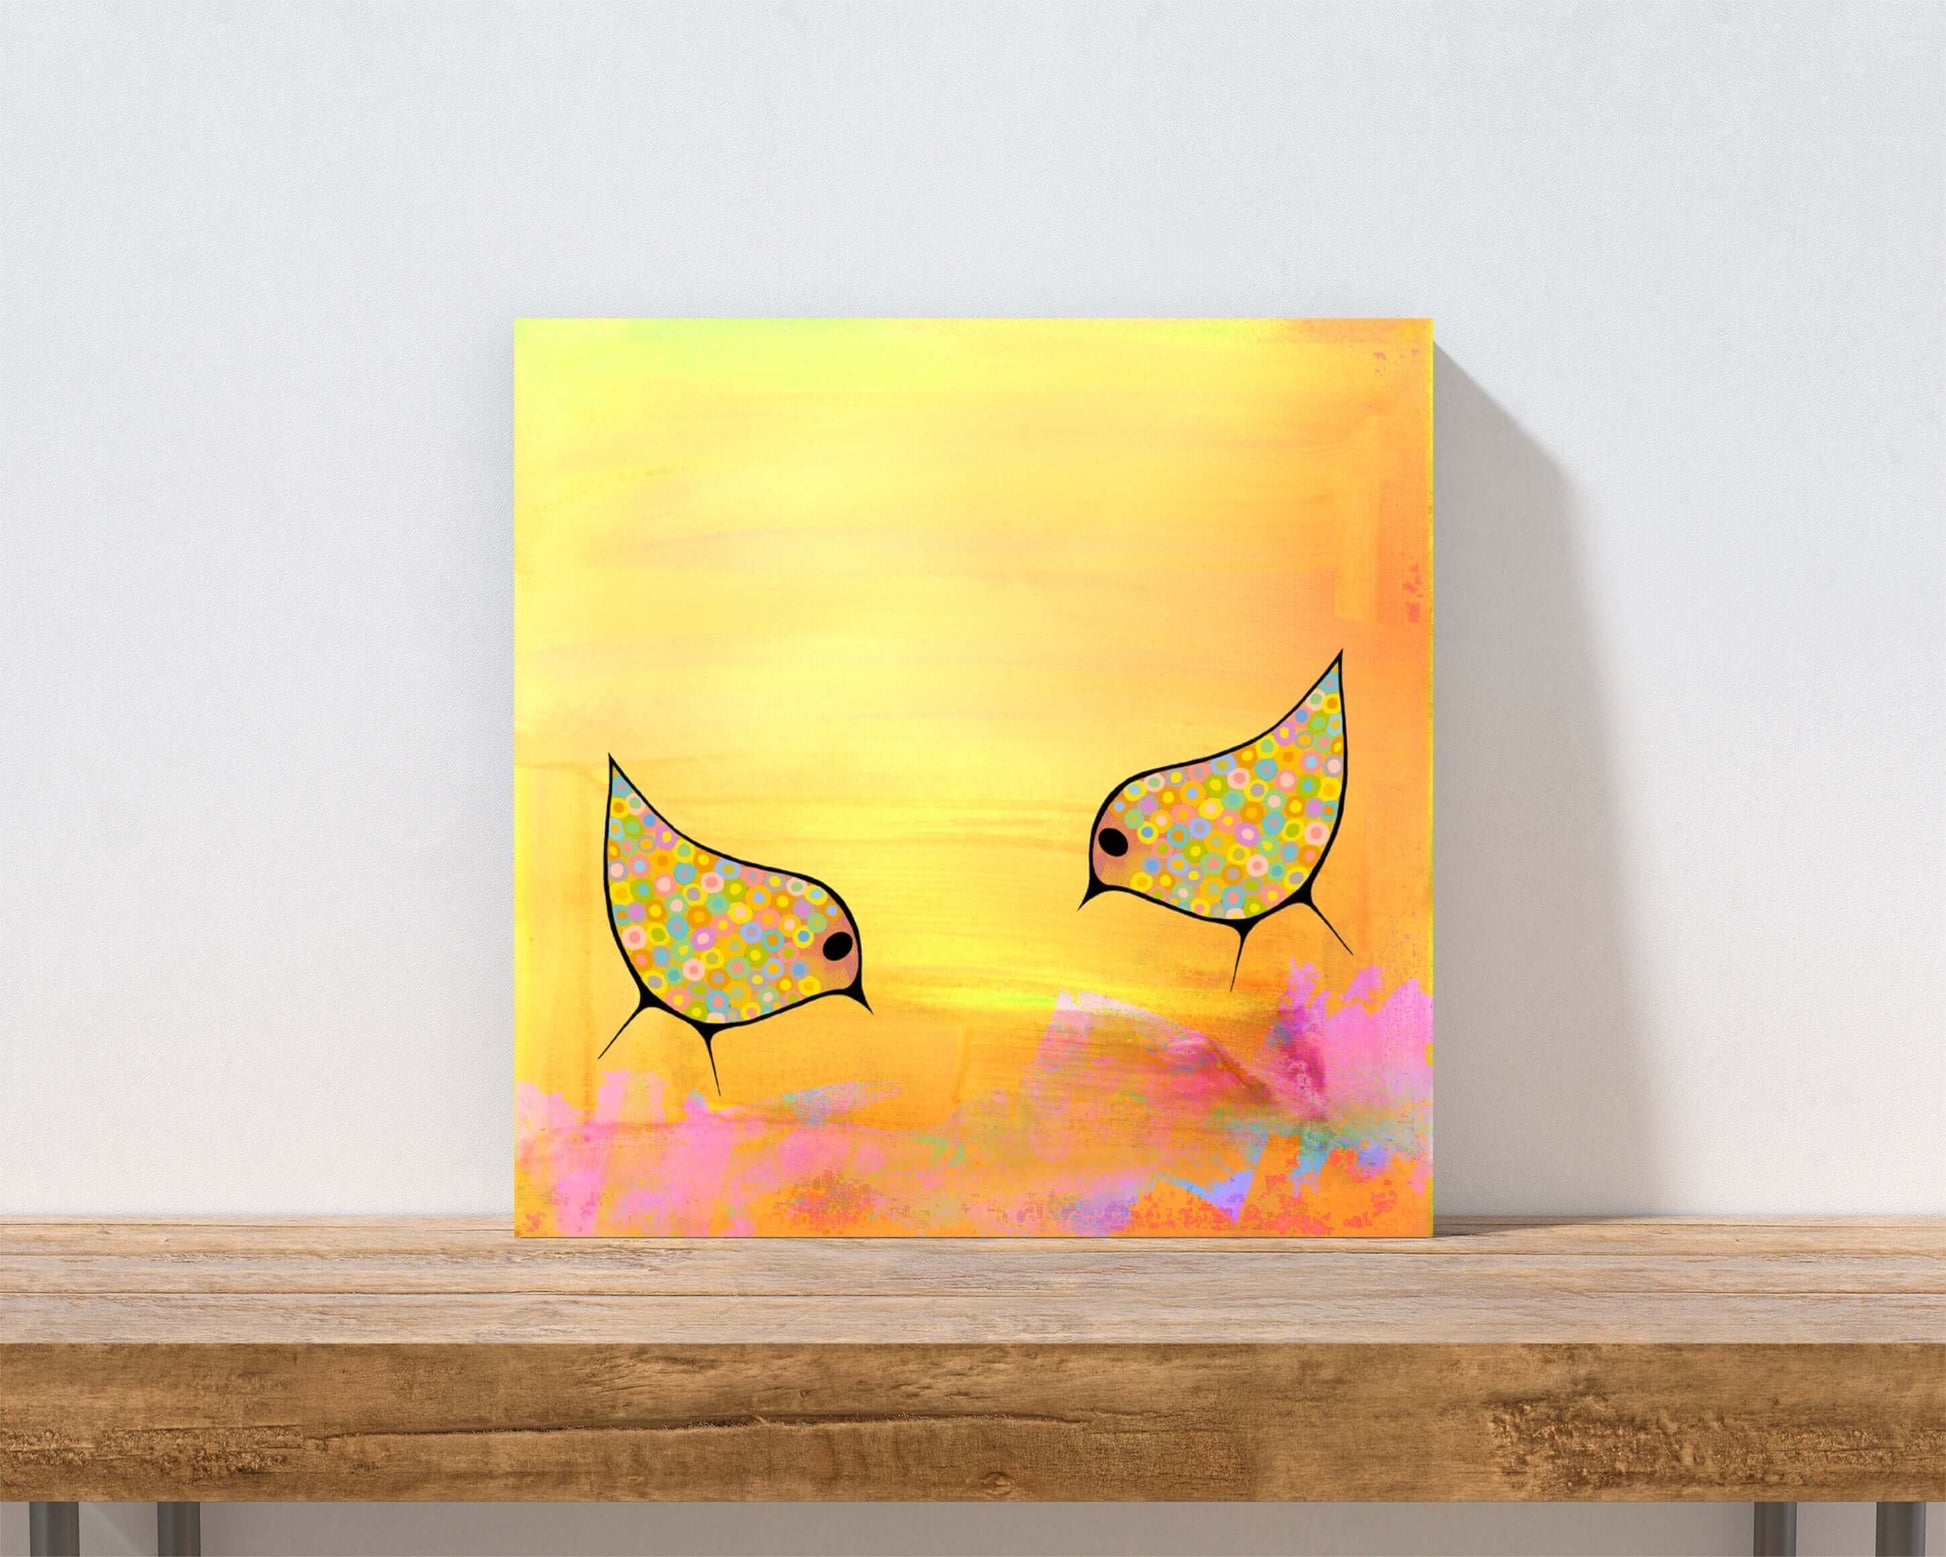 Two Yellow Birds on Sunny Yellow Mixed Media Background “Yellow Birds” Canvas Print Wall Art Small Canvas on Shelf